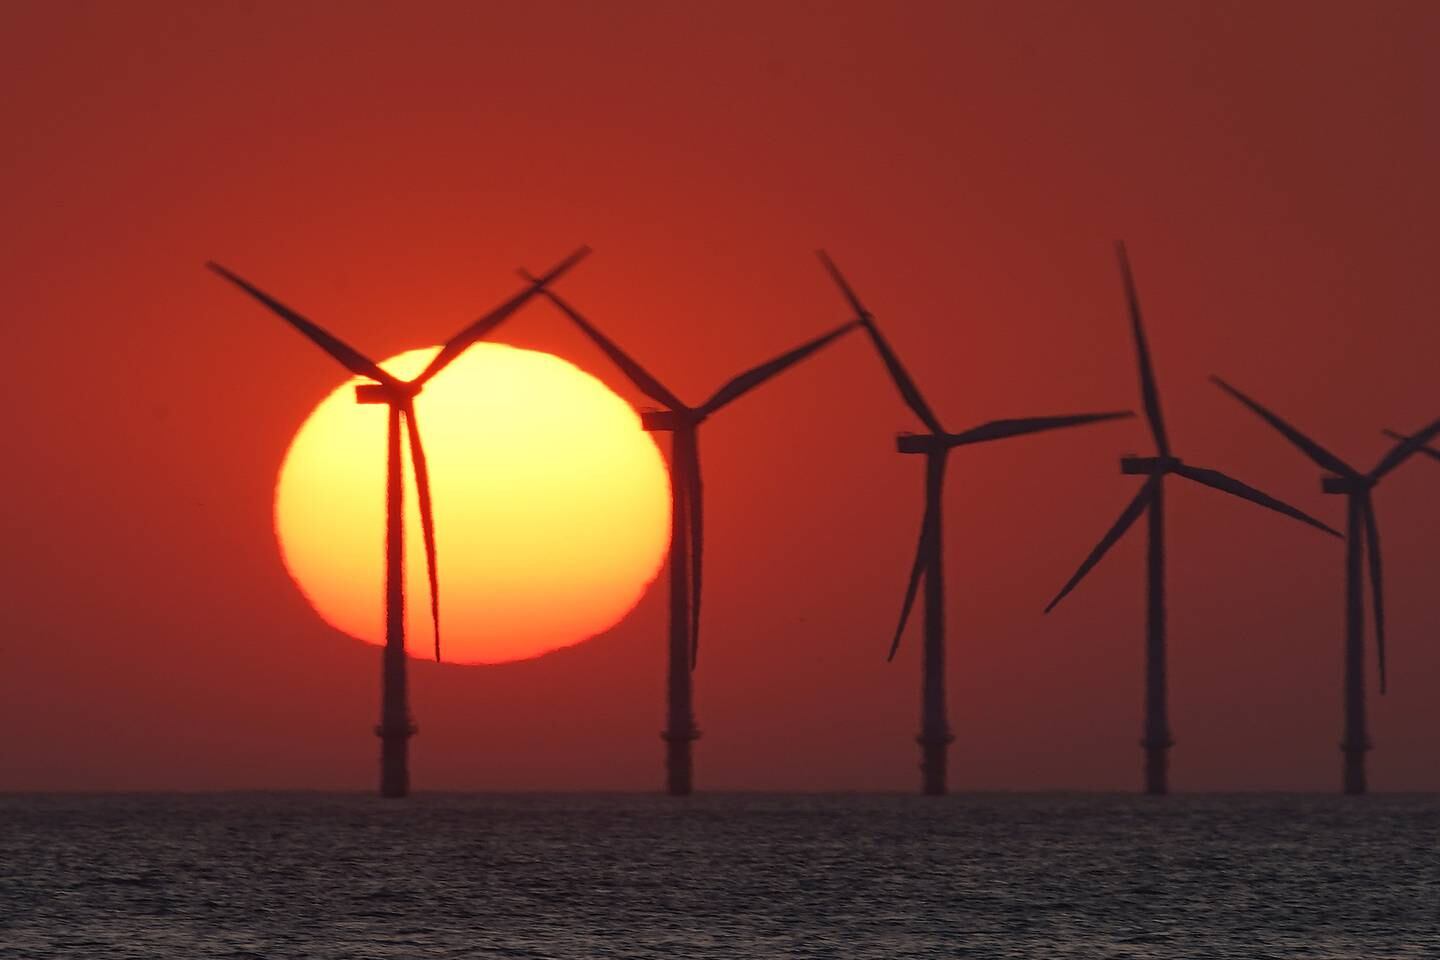 The Burbo Bank Offshore Wind Farm in the Irish Sea. Getty Images